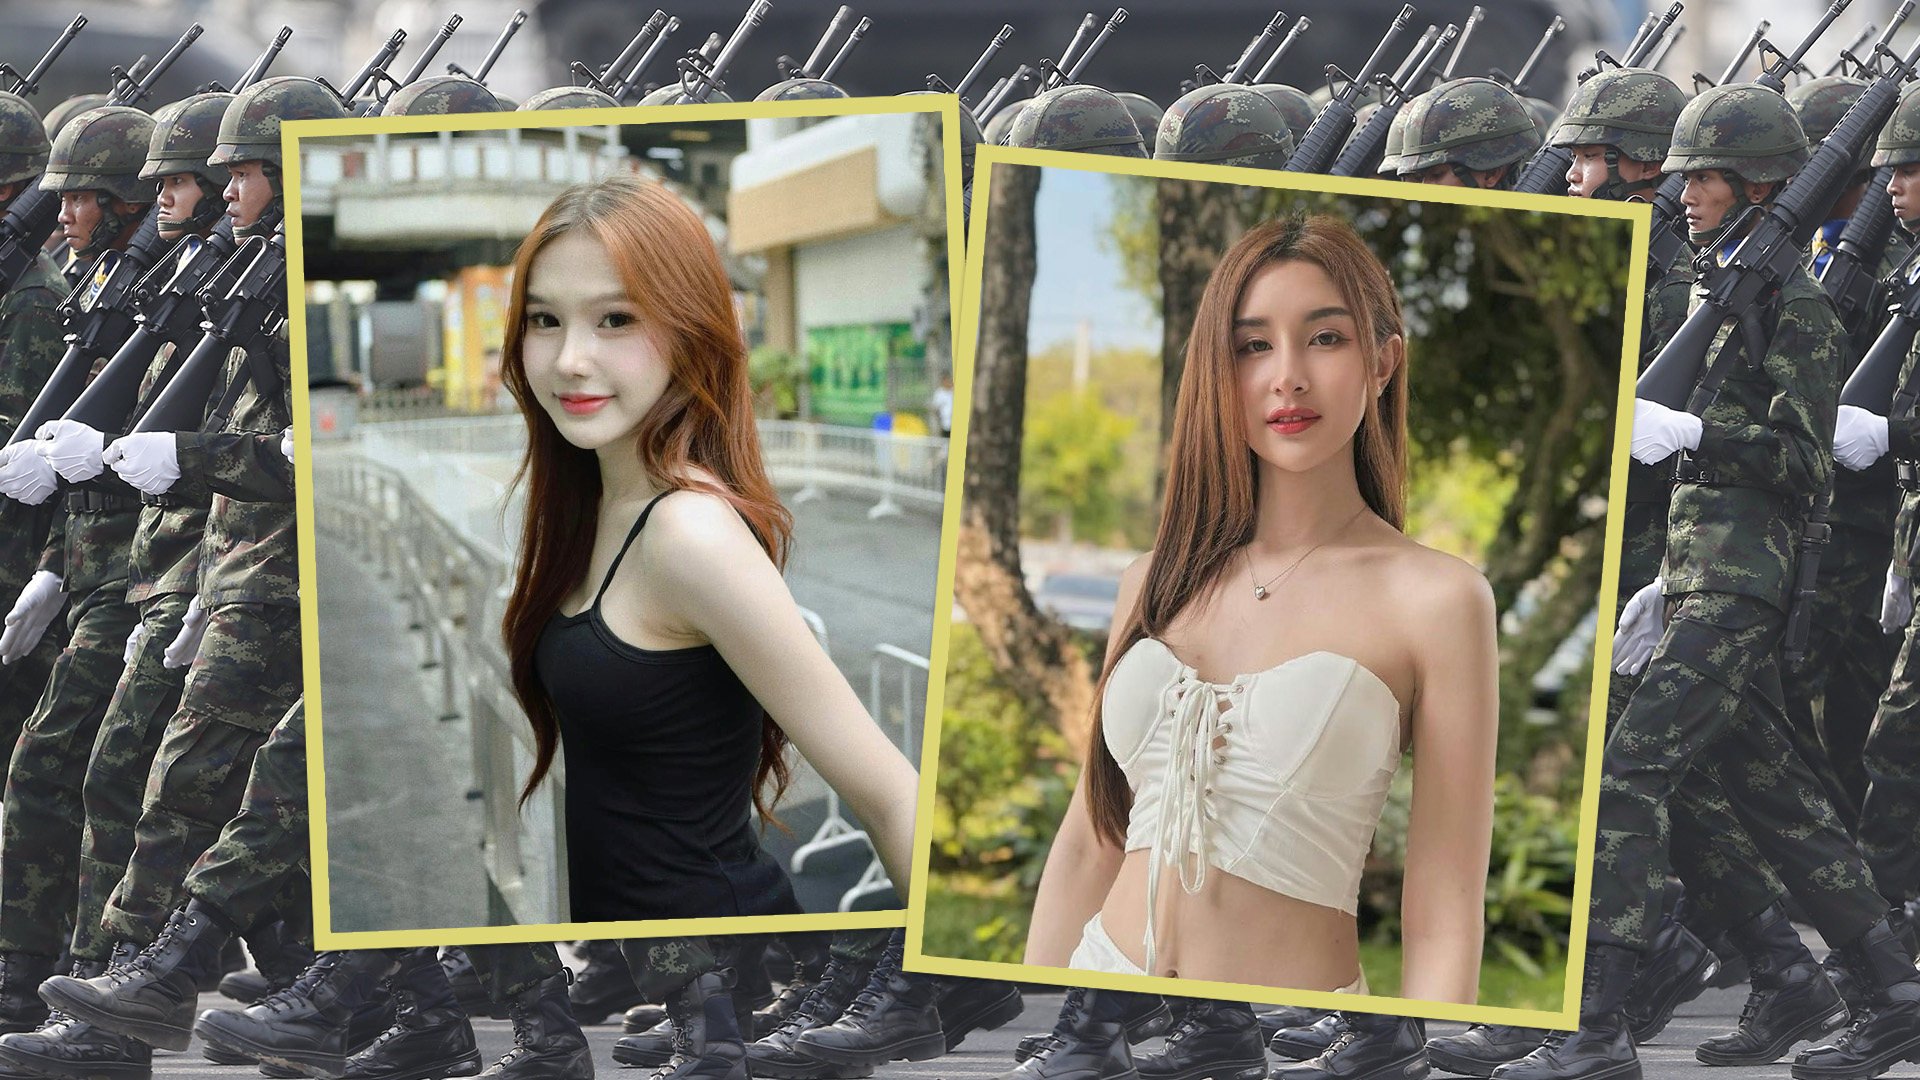 A pair of stunning transgender women who turned up at an army recruitment office in Thailand and were exempted from service by presenting proof of sex reassignment surgery have caused quite a stir on social media. Photo: SCMP composite/Shutterstock/Facebook/Instagram